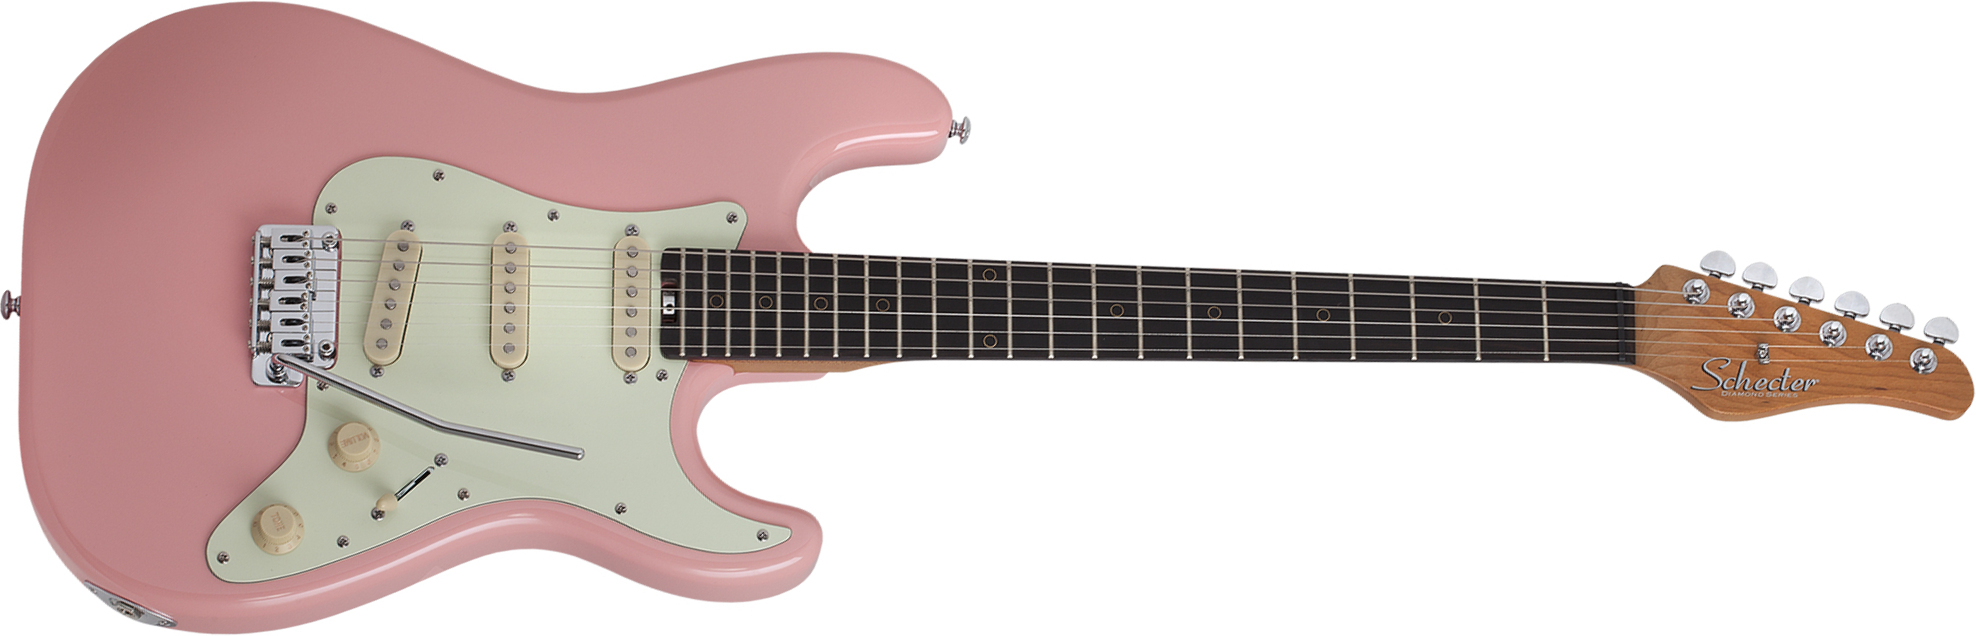 Schecter Nick Johnston Traditional Signature 3s Trem Eb - Atomic Coral - Str shape electric guitar - Main picture